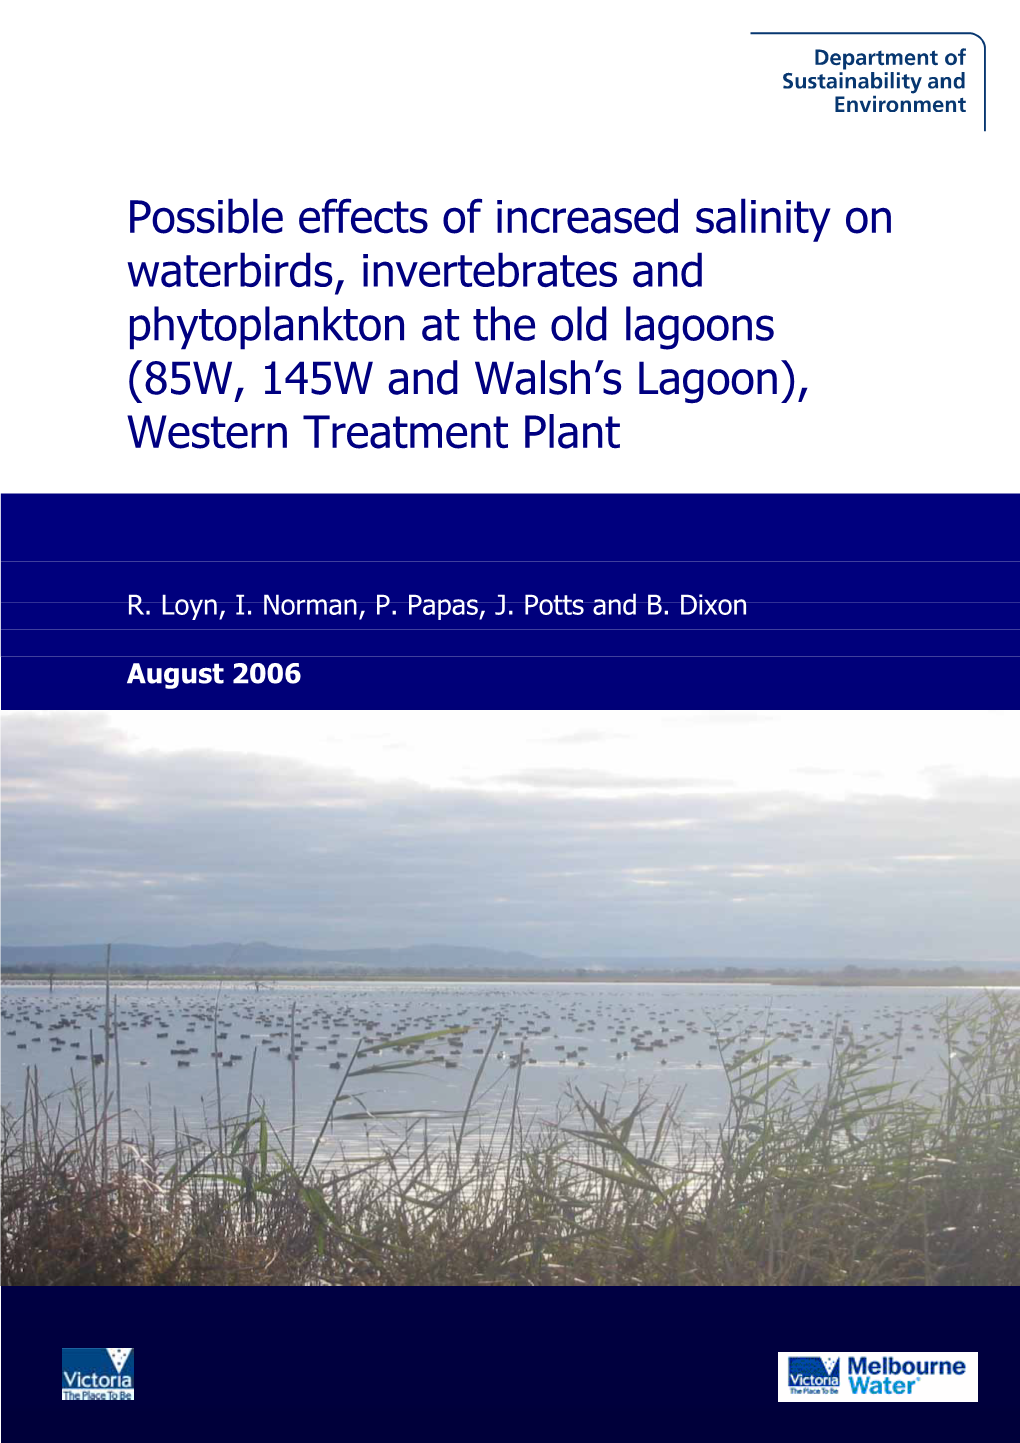 Possible Effects of Increased Salinity on Waterbirds, Invertebrates and Phytoplankton at the Old Lagoons (85W, 145W and Walsh’S Lagoon), Western Treatment Plant